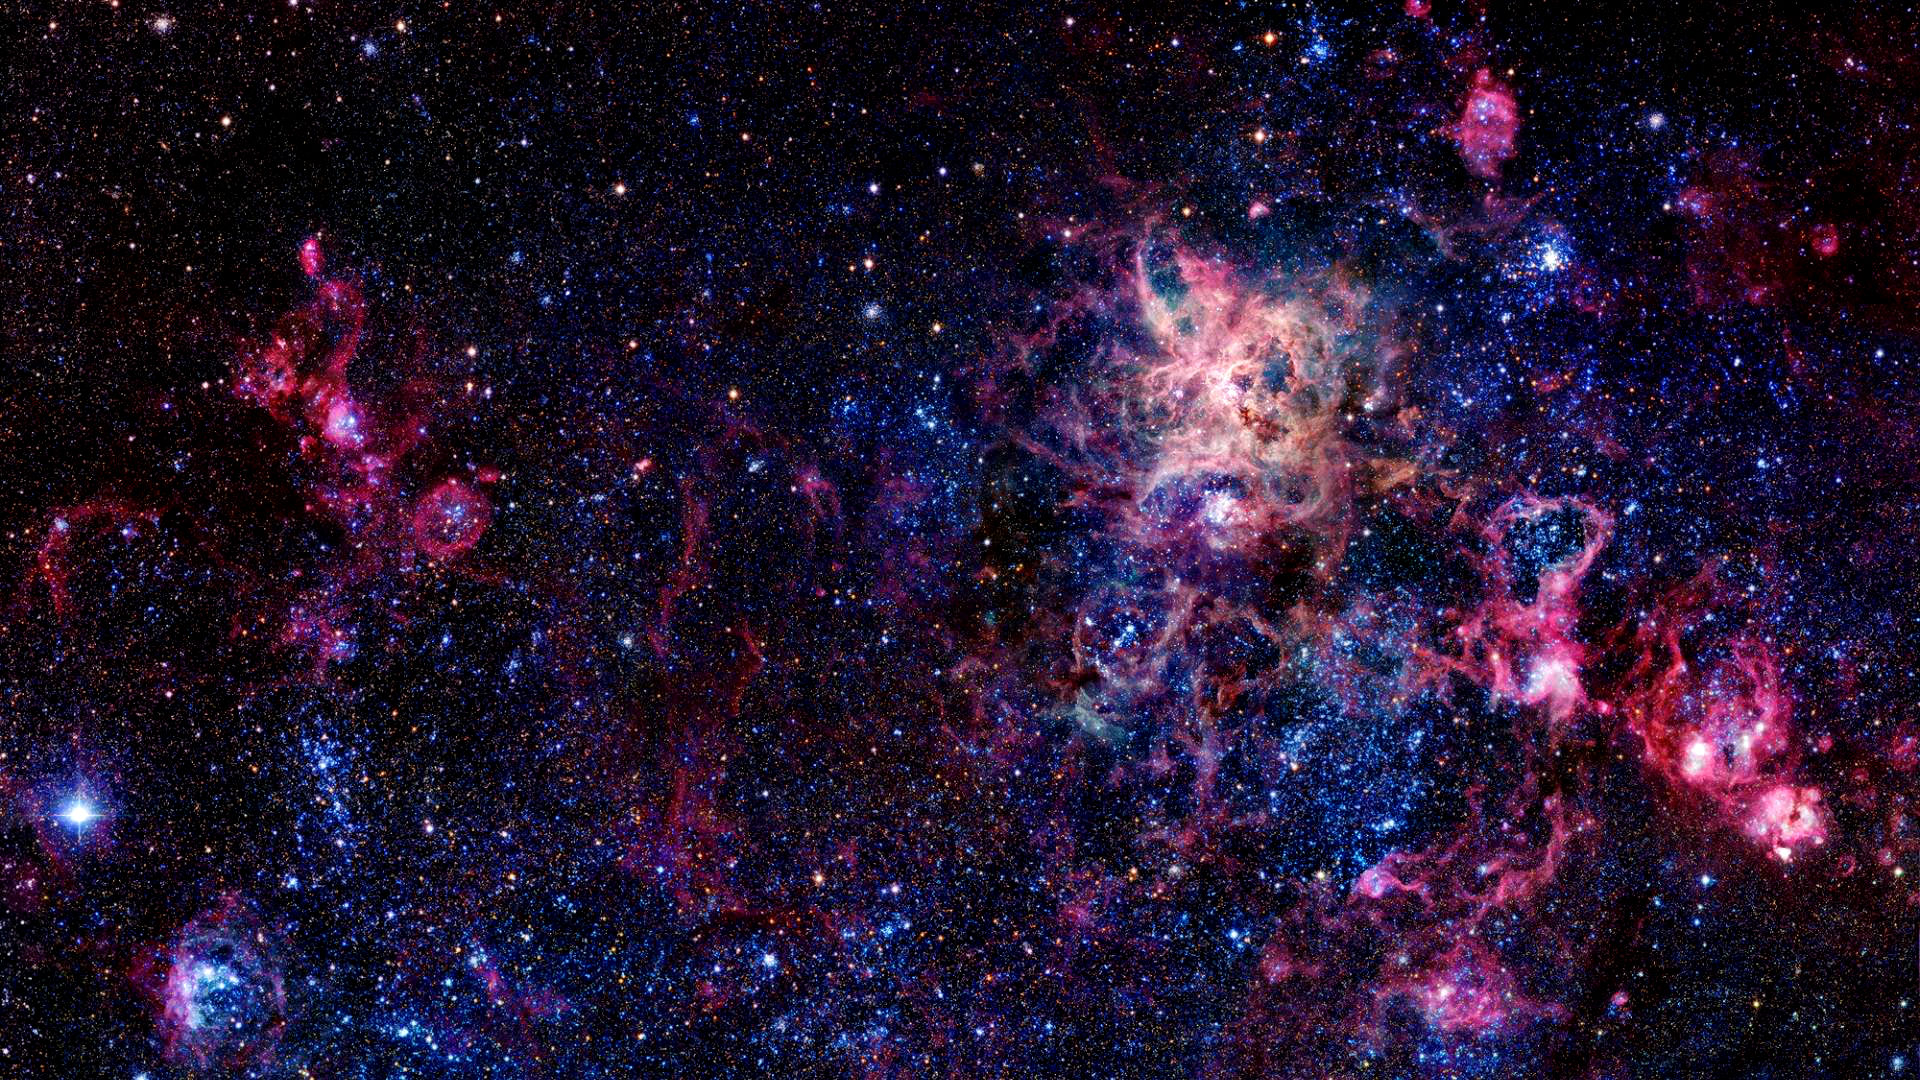 Space Tumblr Backgrounds Hd Wallpapers Hd Quality